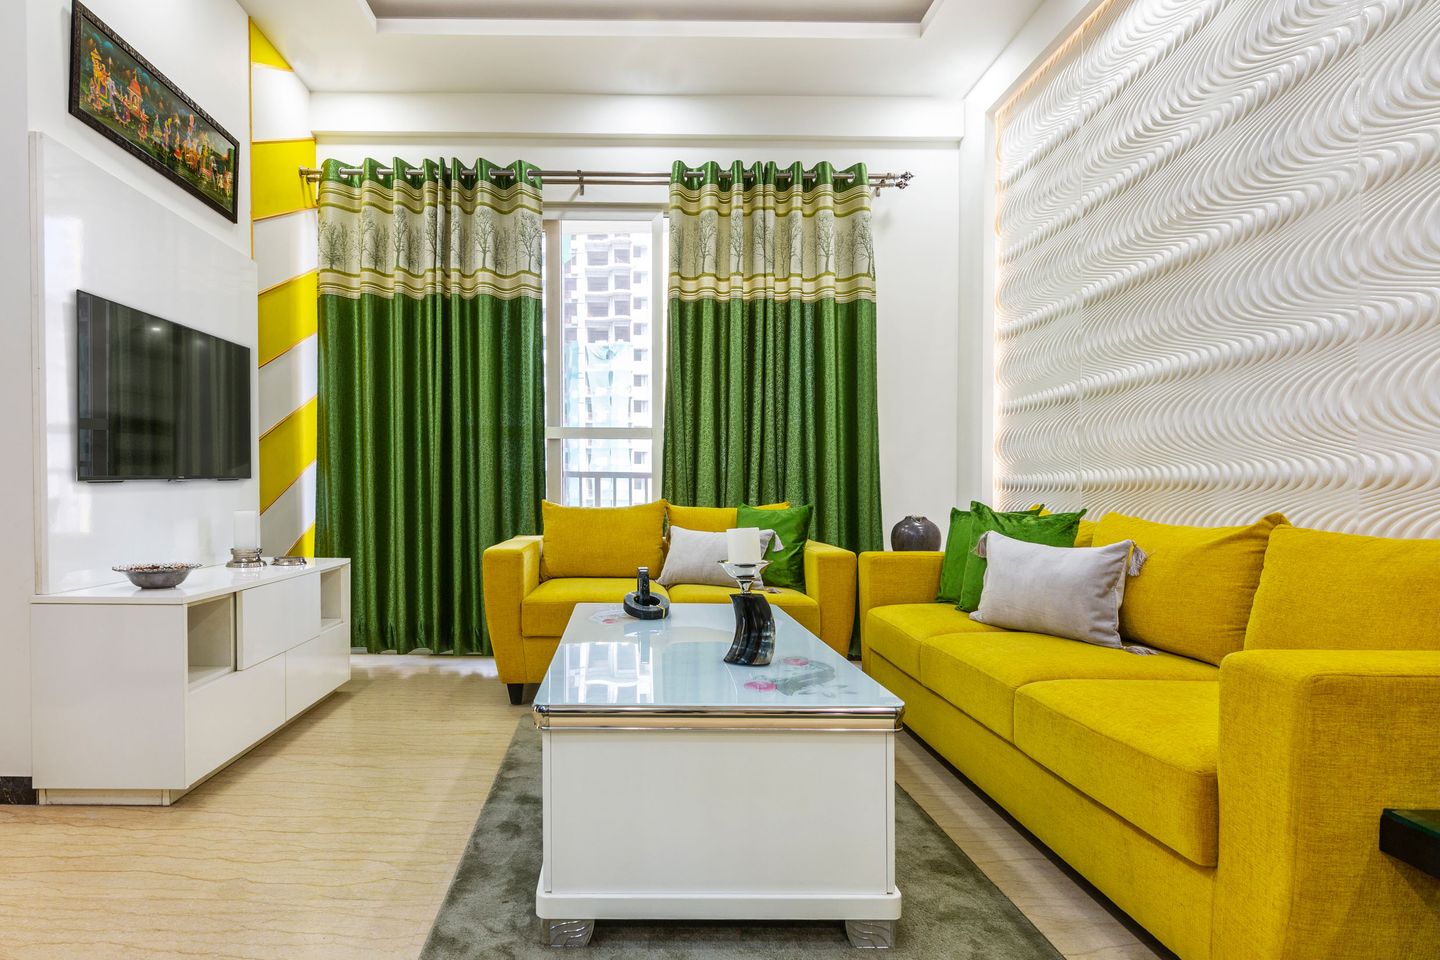 3-BHK Flat In Noida With A Bright Yellow And Green Living Room - Livspace